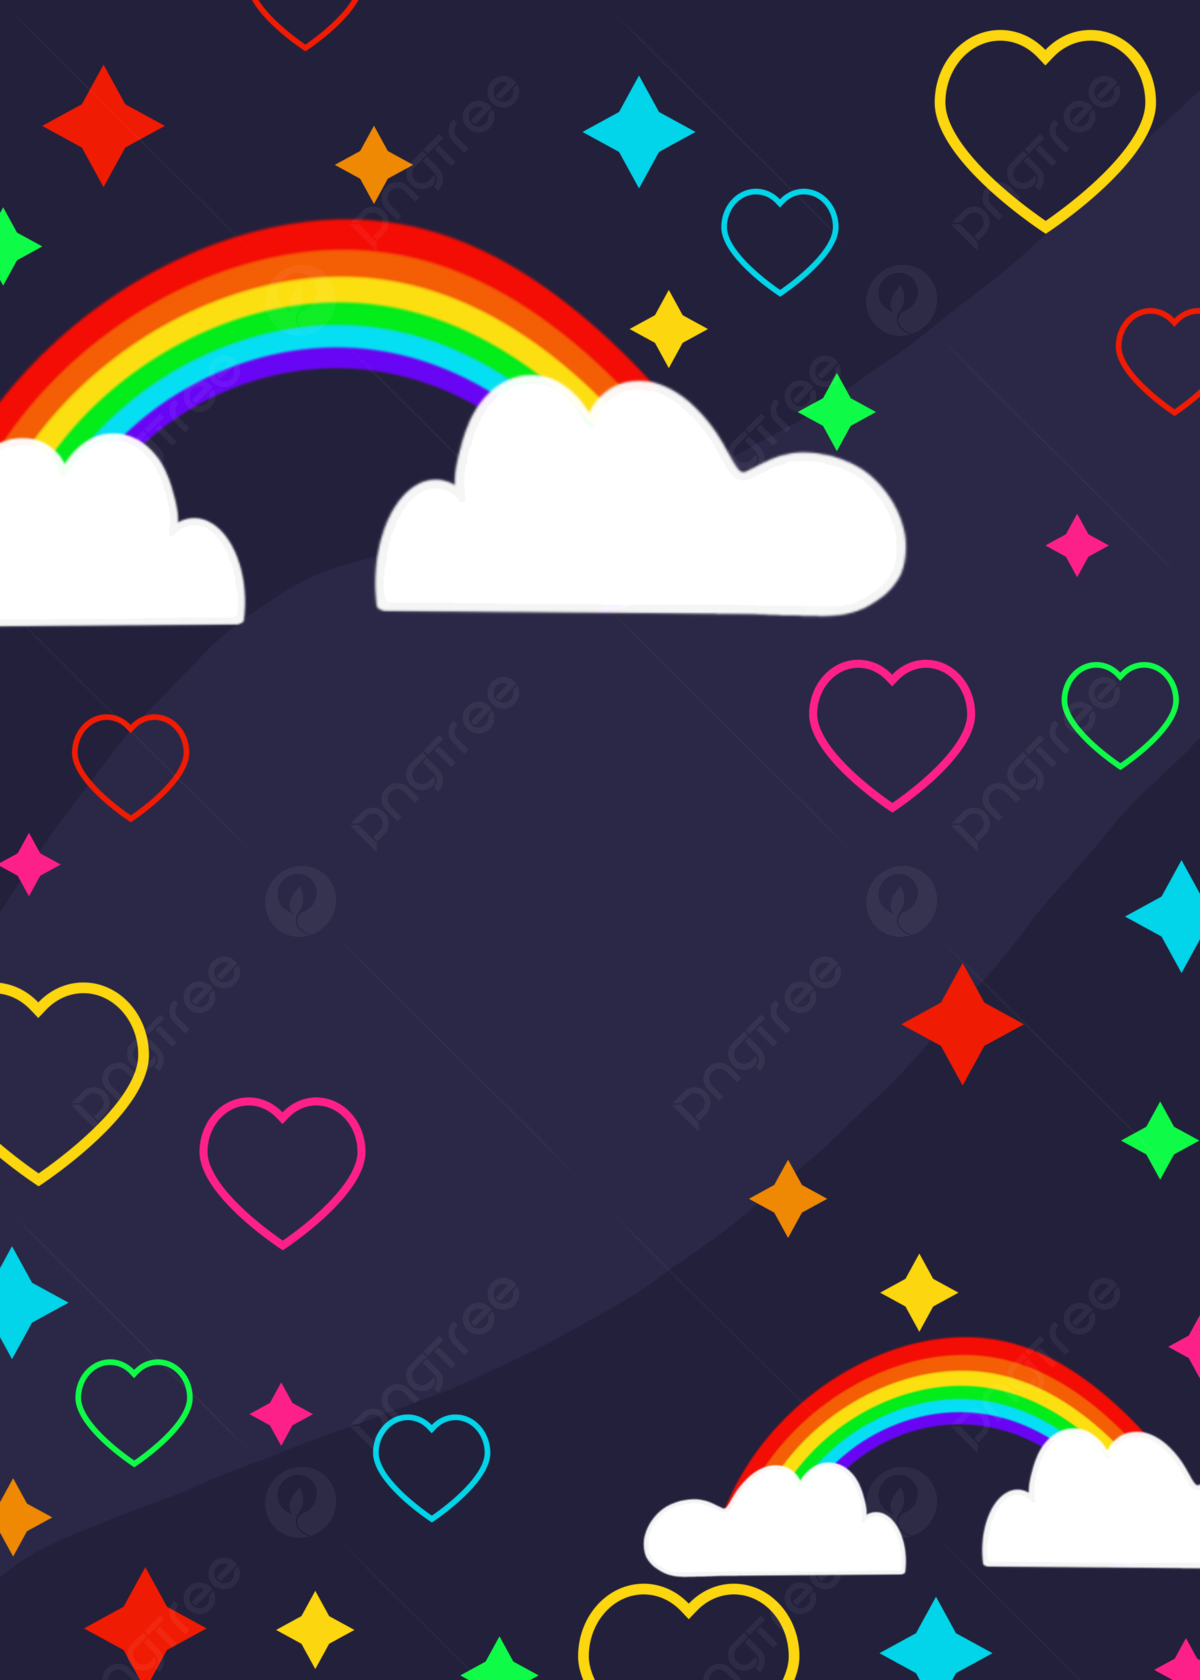 Blue Rainbow Pride Love Cloud Background Wallpaper Image For Free Download